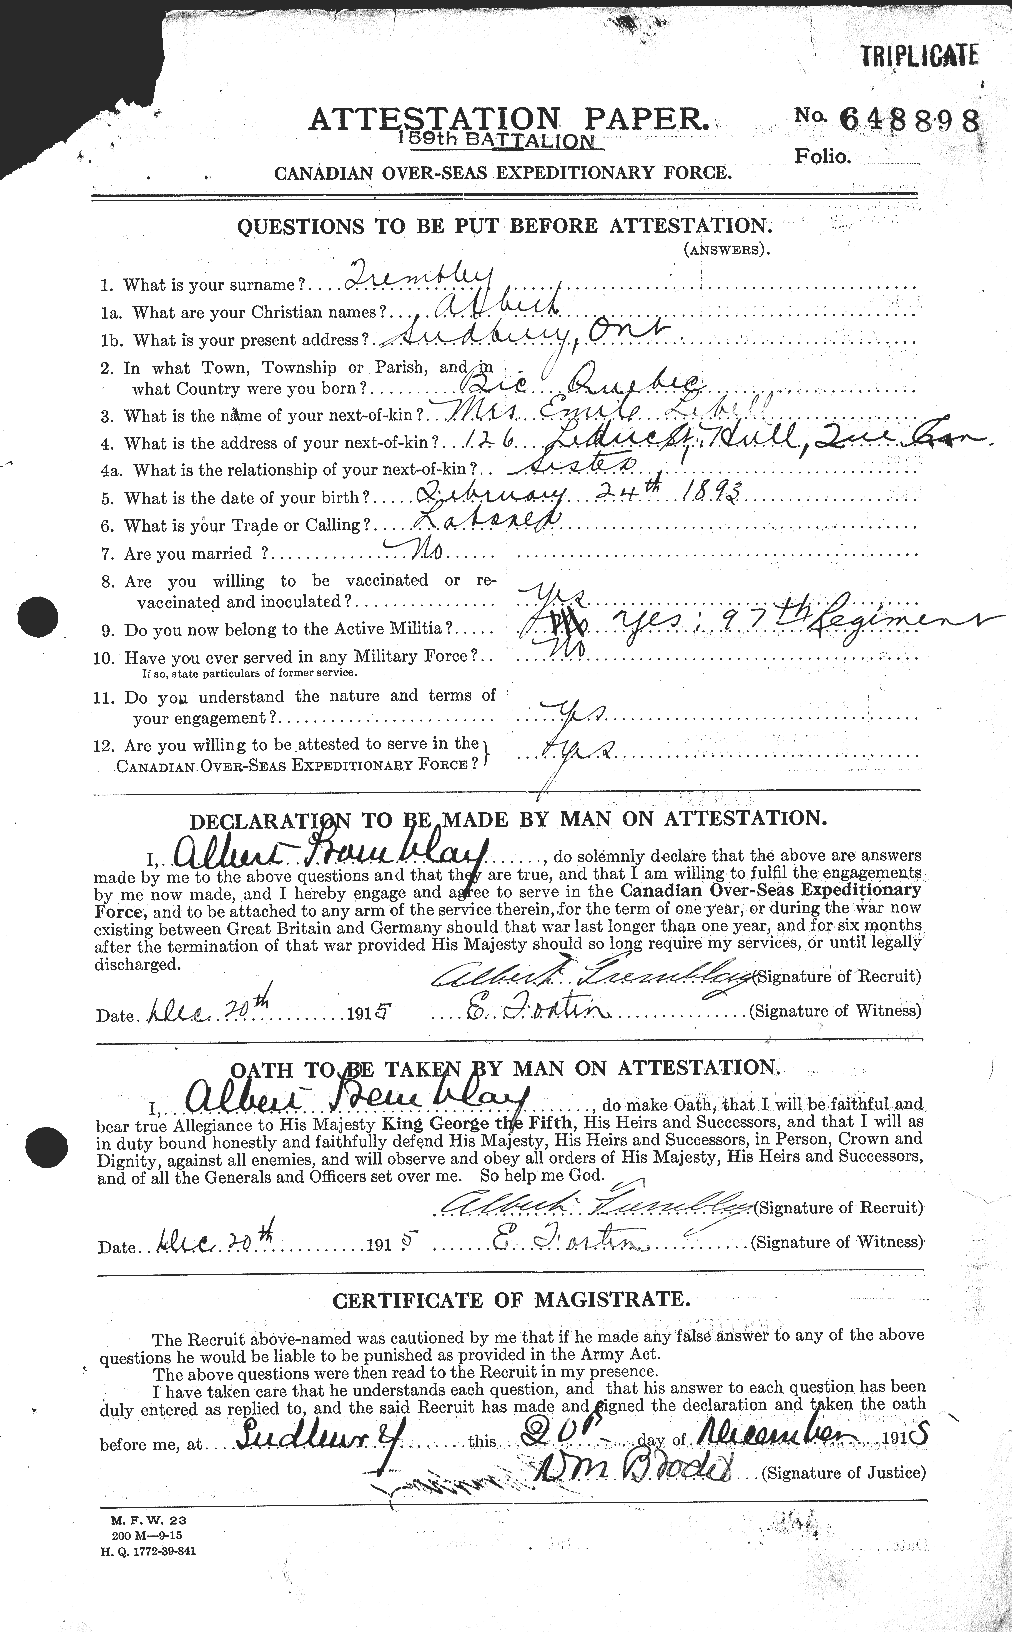 Personnel Records of the First World War - CEF 638363a